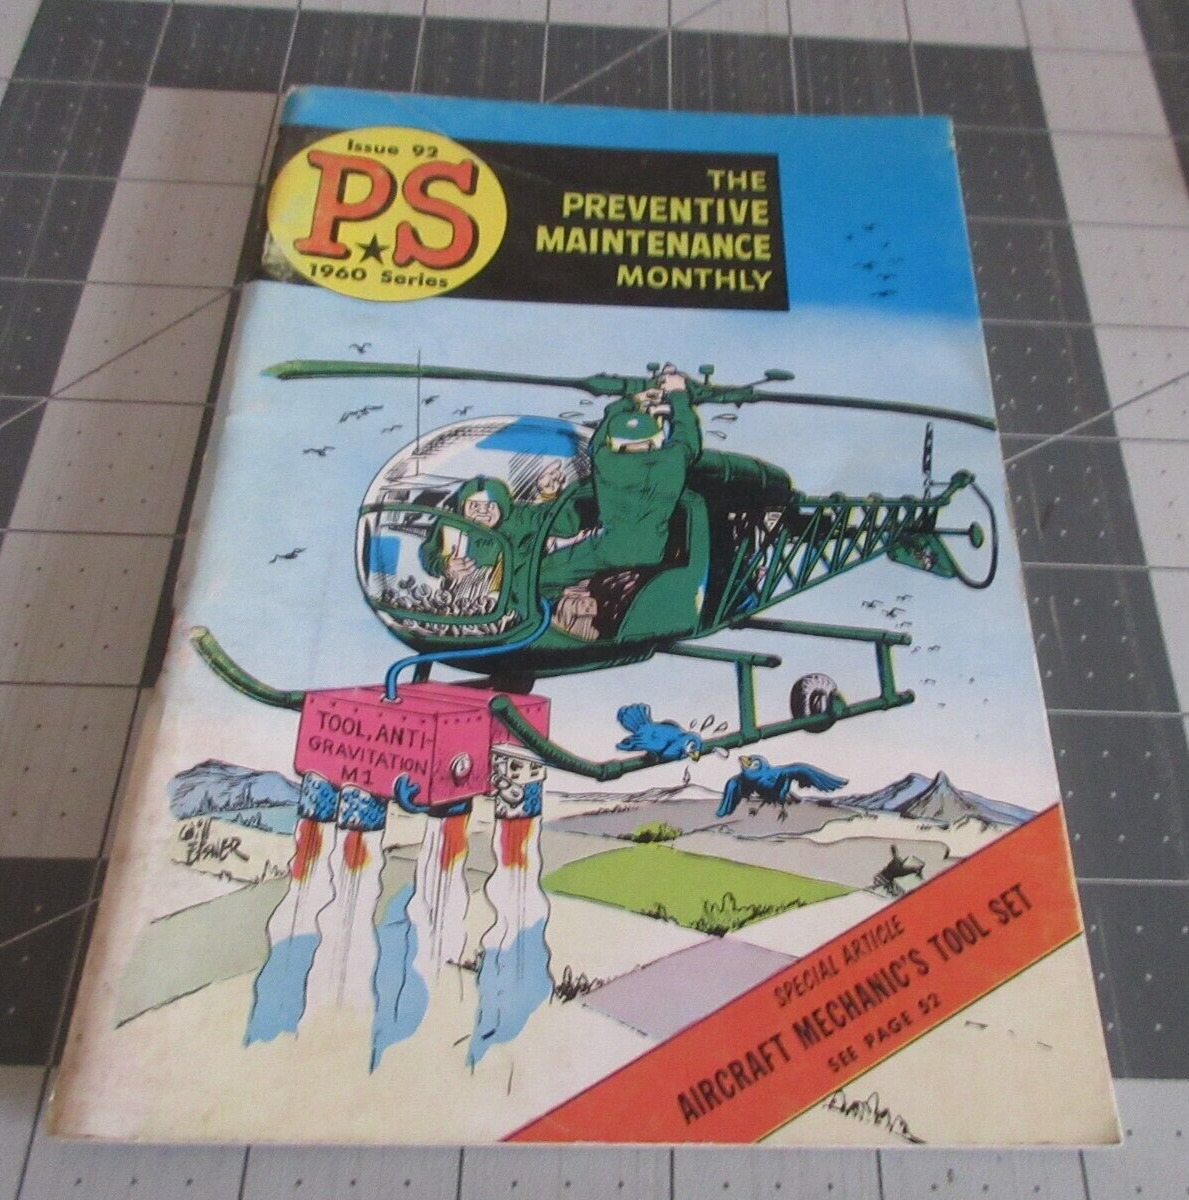 1960 Series PS The Preventive Maintenance monthly Magazine issue 92